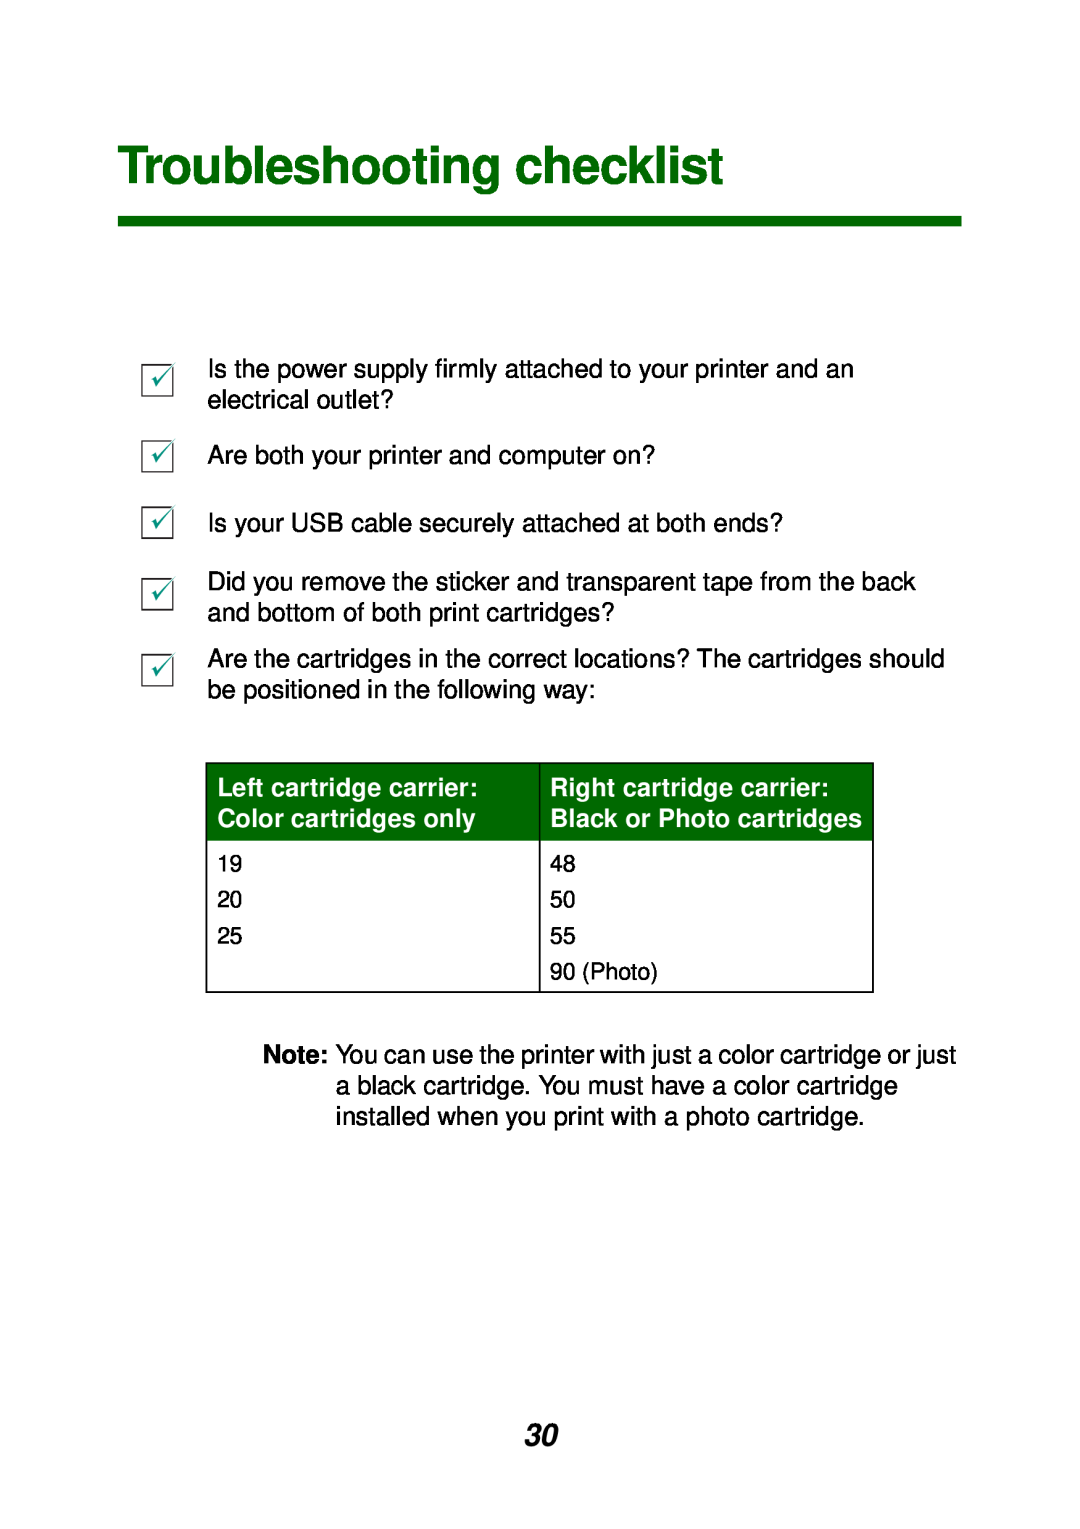 Lexmark P700 manual Troubleshooting checklist, Left cartridge carrier, Right cartridge carrier, Color cartridges only 